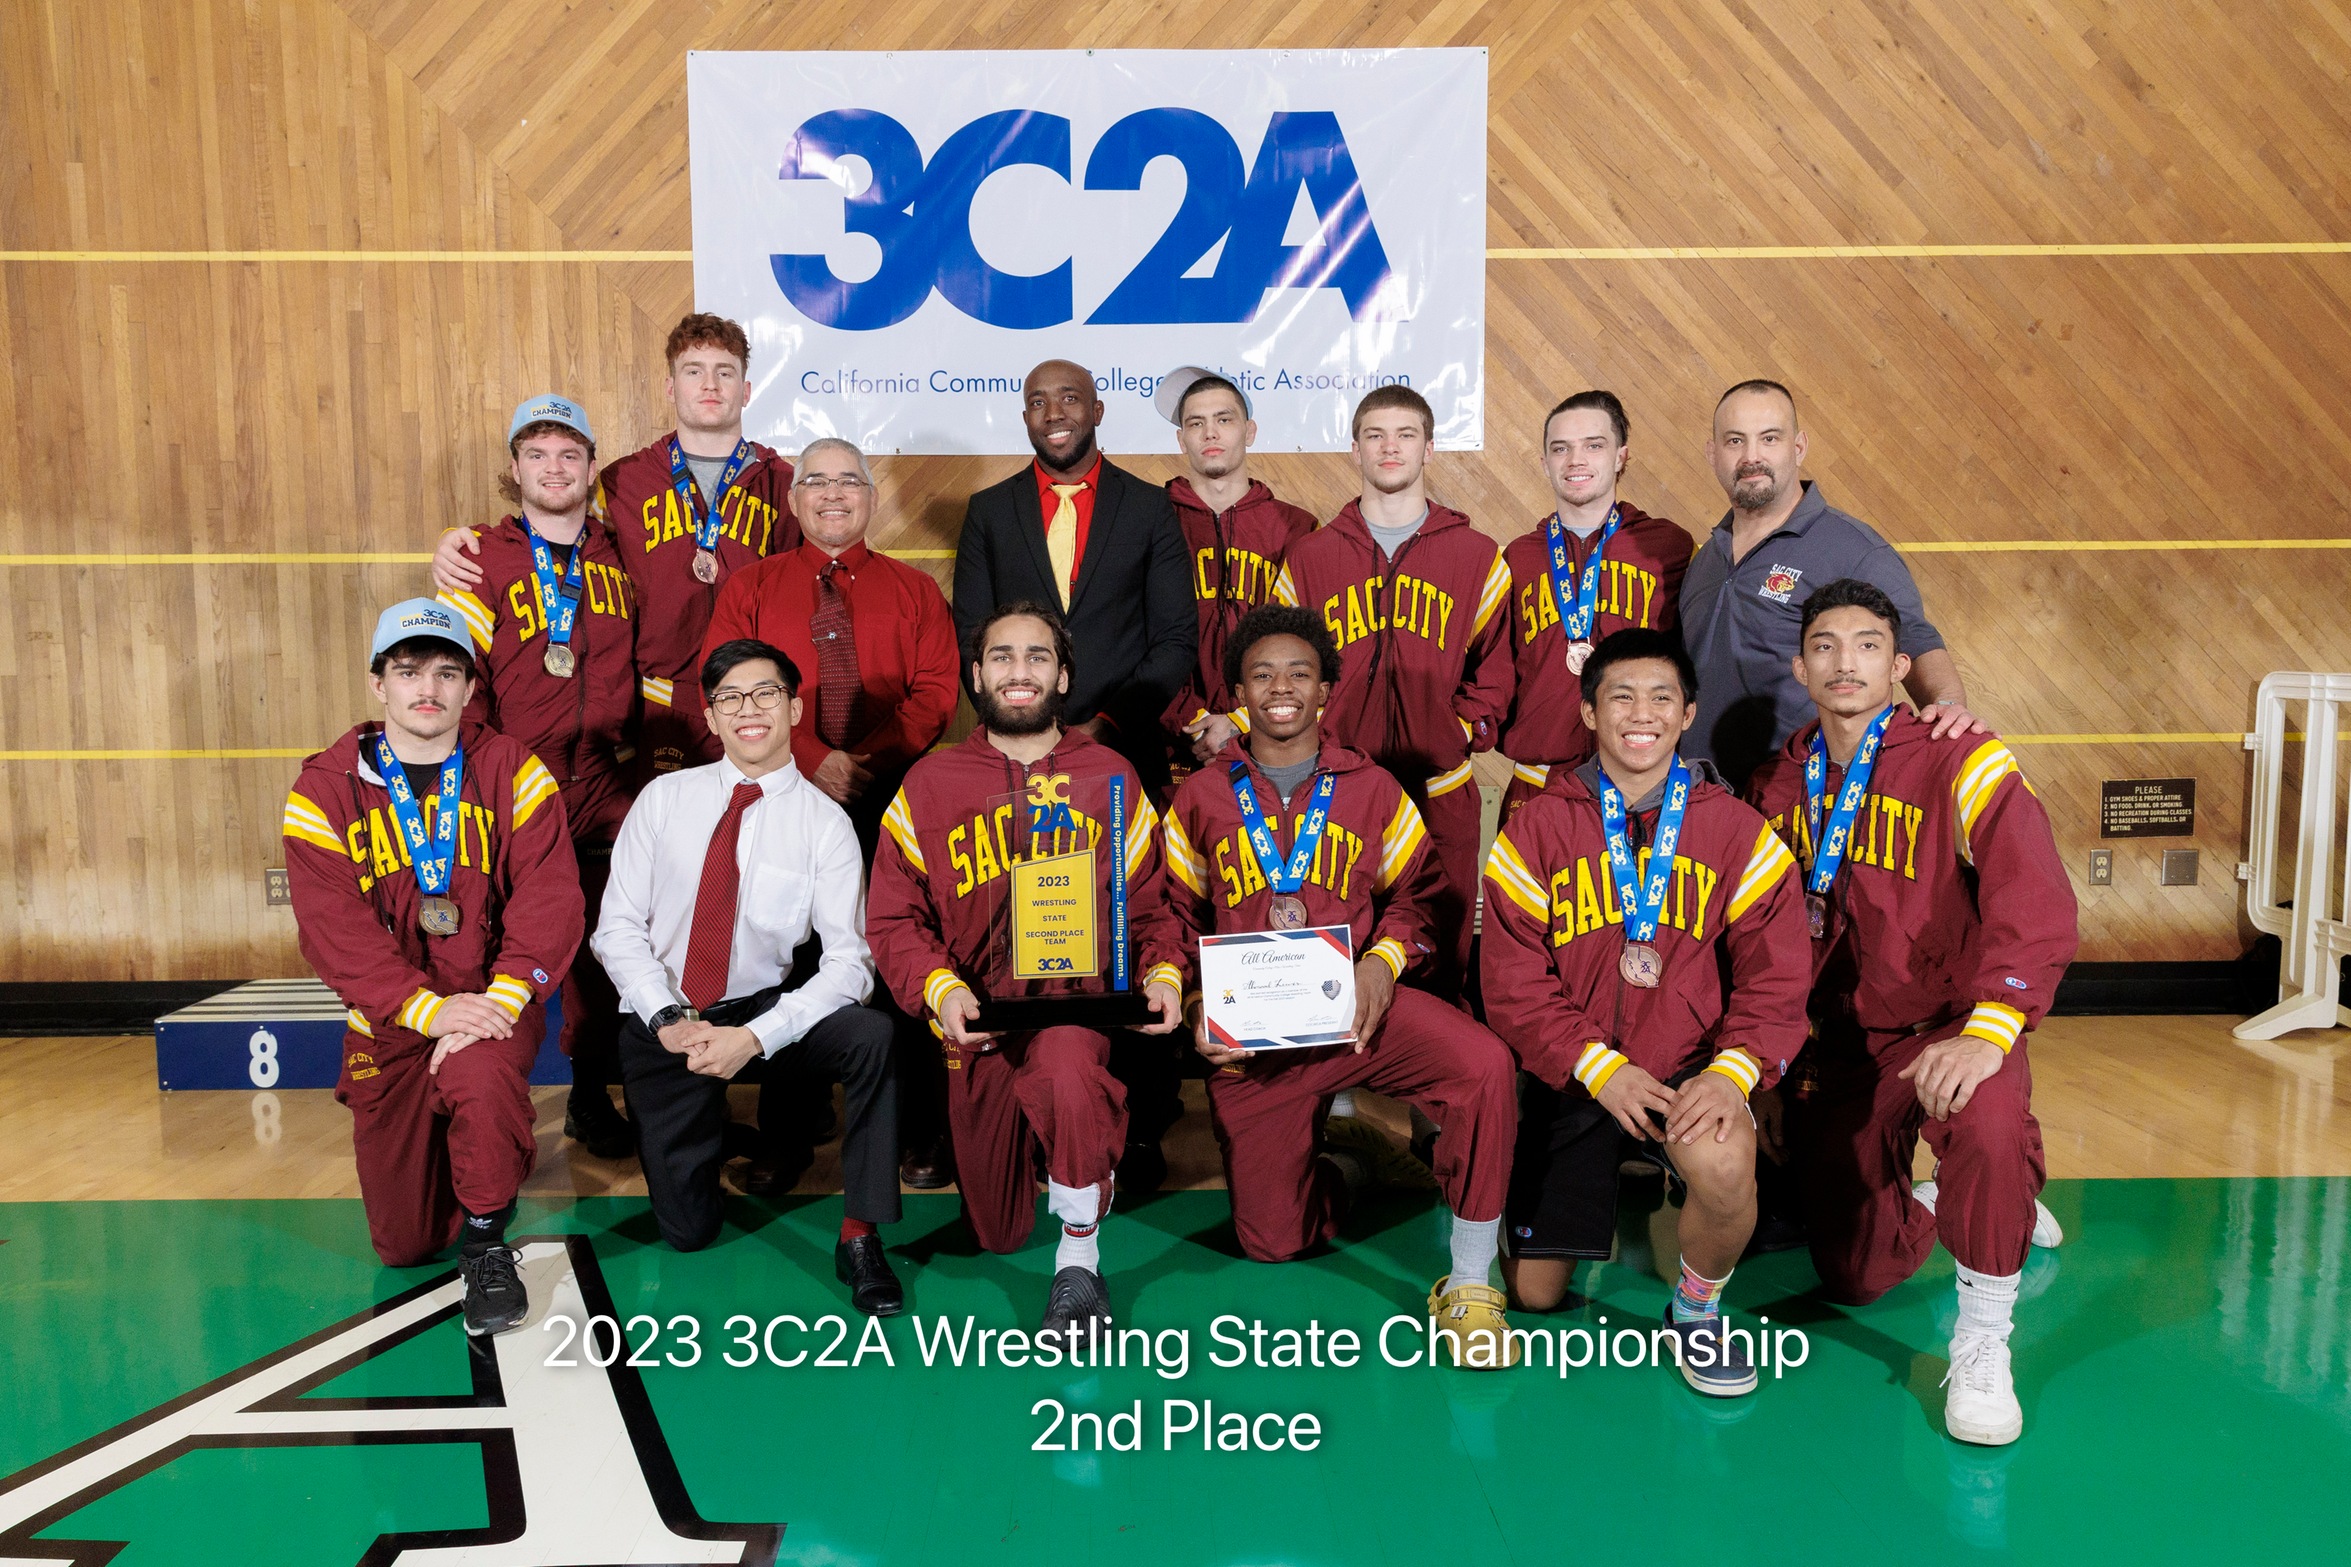 Wrestling is the CCCAA State Runner-Up; Boyd (165 lbs), Chavez-Morales (184 lbs) and Birch (197 lbs) are all individual State Champions